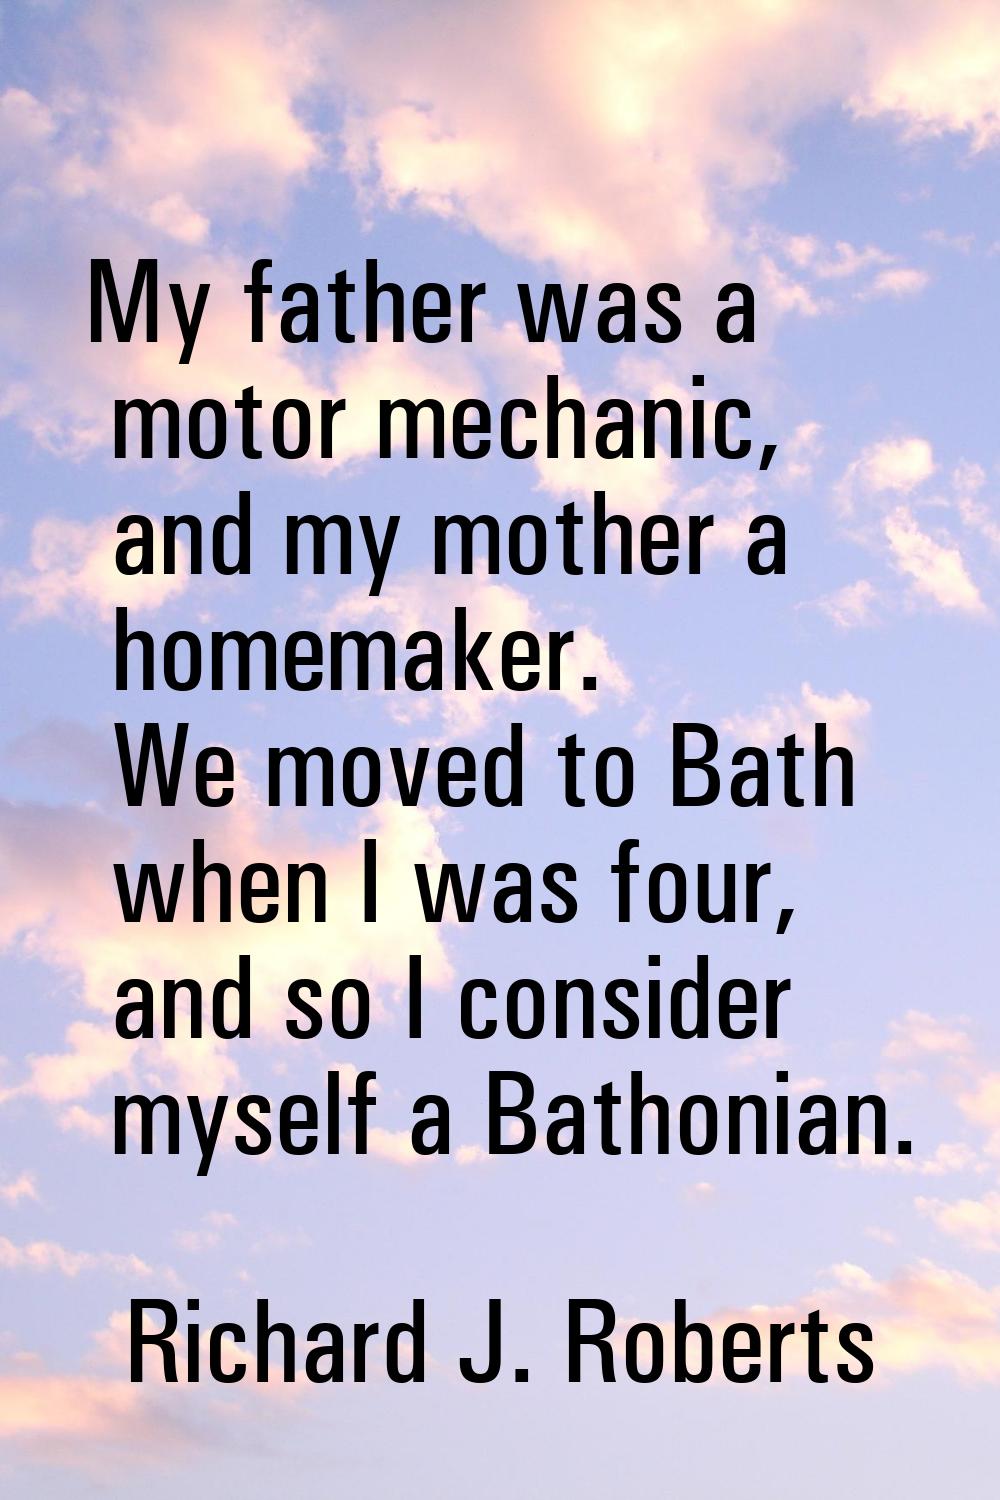 My father was a motor mechanic, and my mother a homemaker. We moved to Bath when I was four, and so